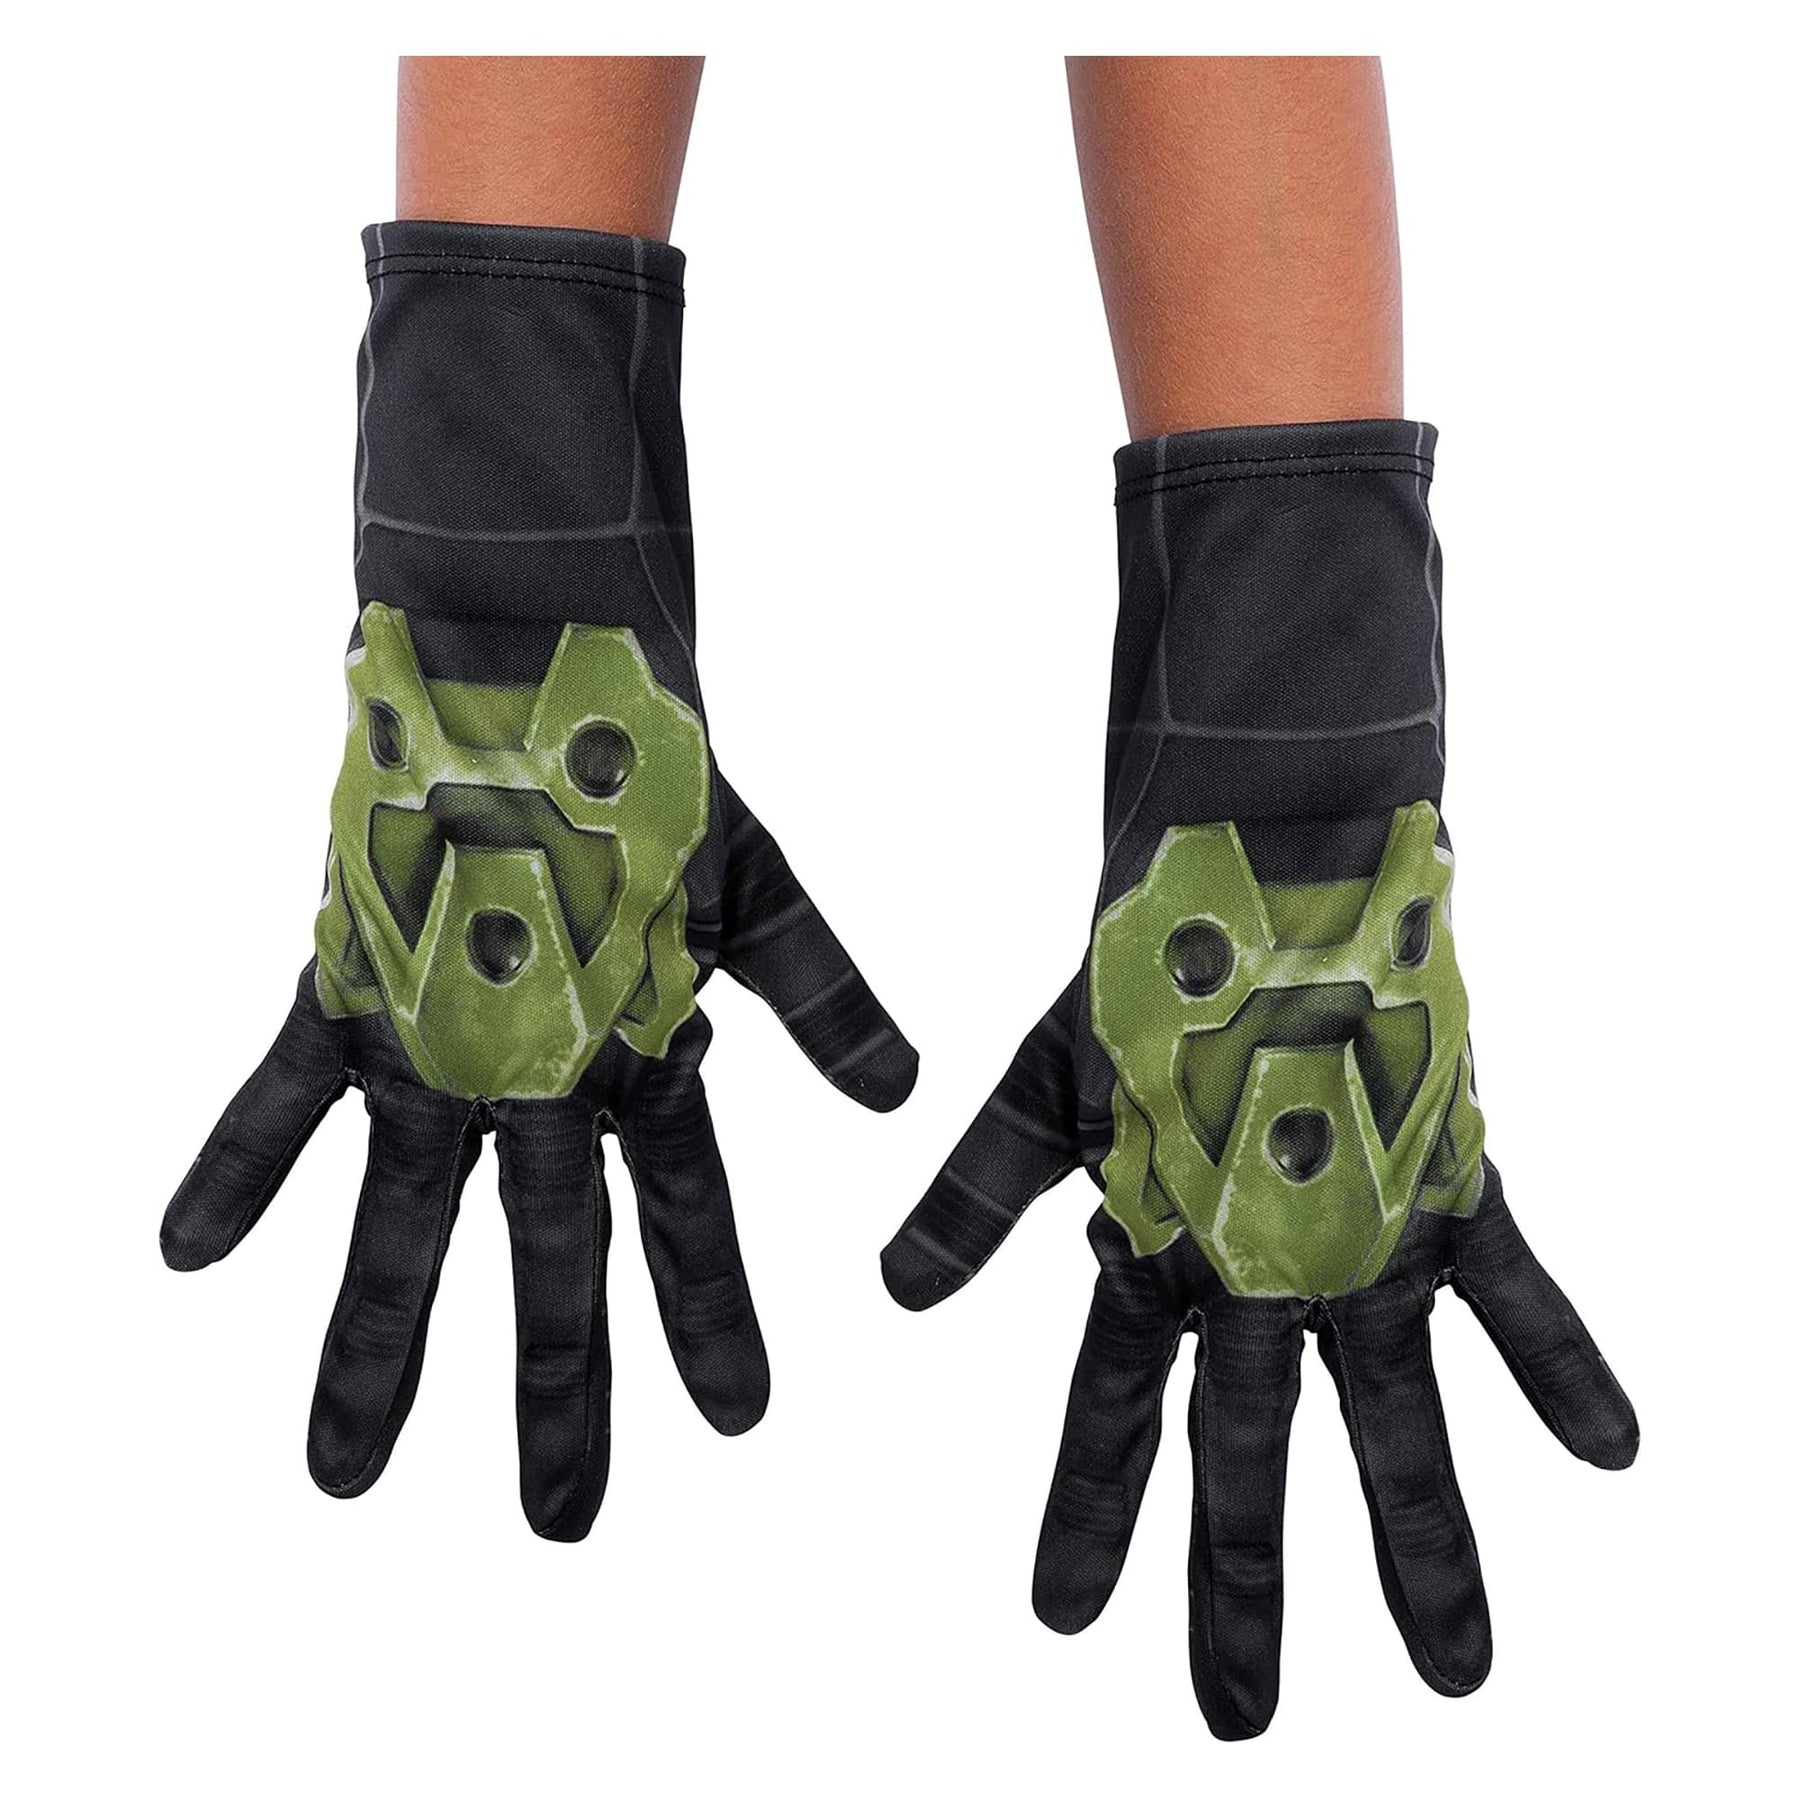 HALO Master Chief Child Costume Gloves | Free Shipping